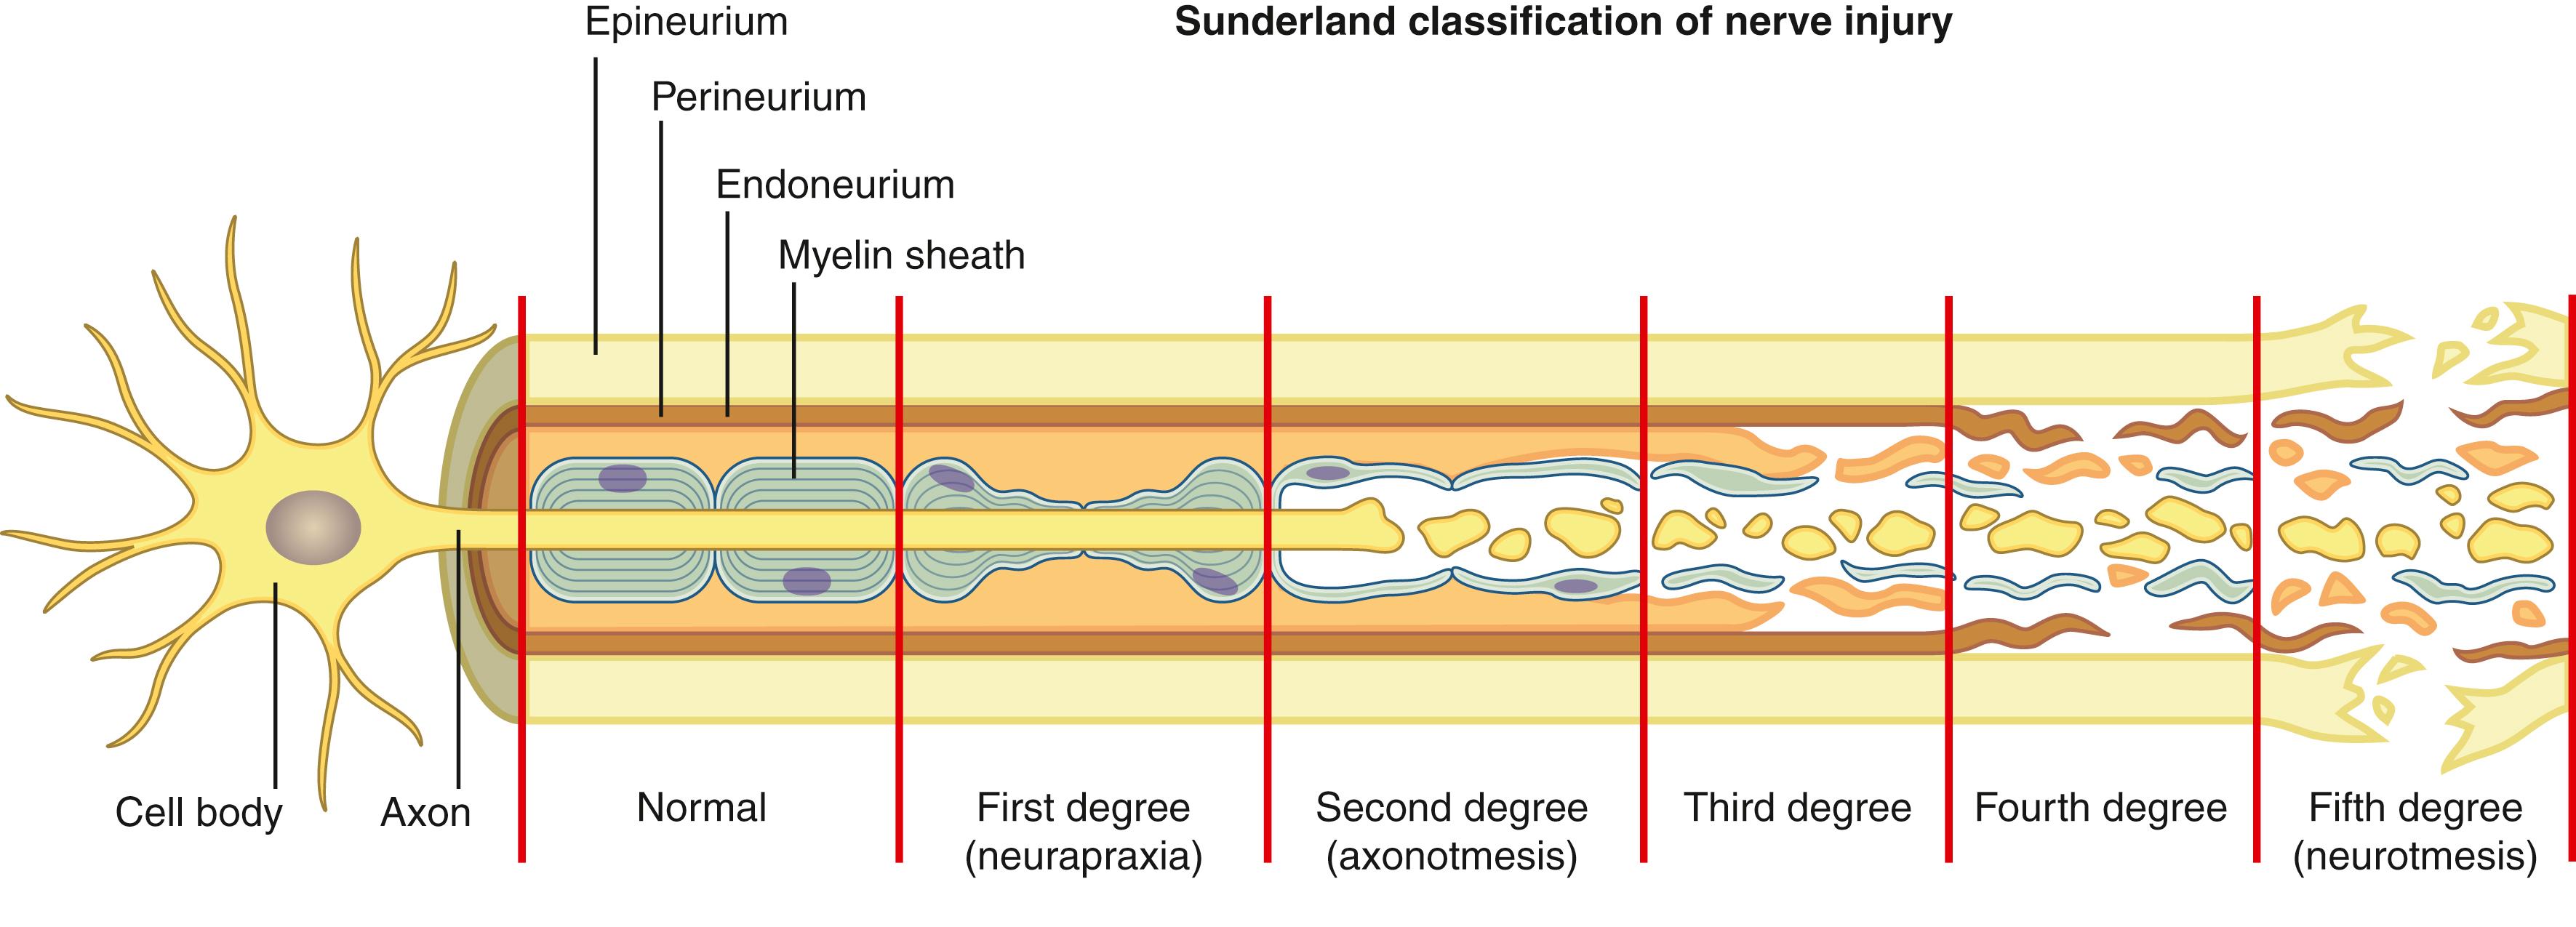 Fig. 30.3, The Sunderland classification describes progressively more severe nerve injuries based on the sequential disruption of connective tissue layers. Third-, fourth-, and fifth-degree injuries generally require surgical reconstruction.